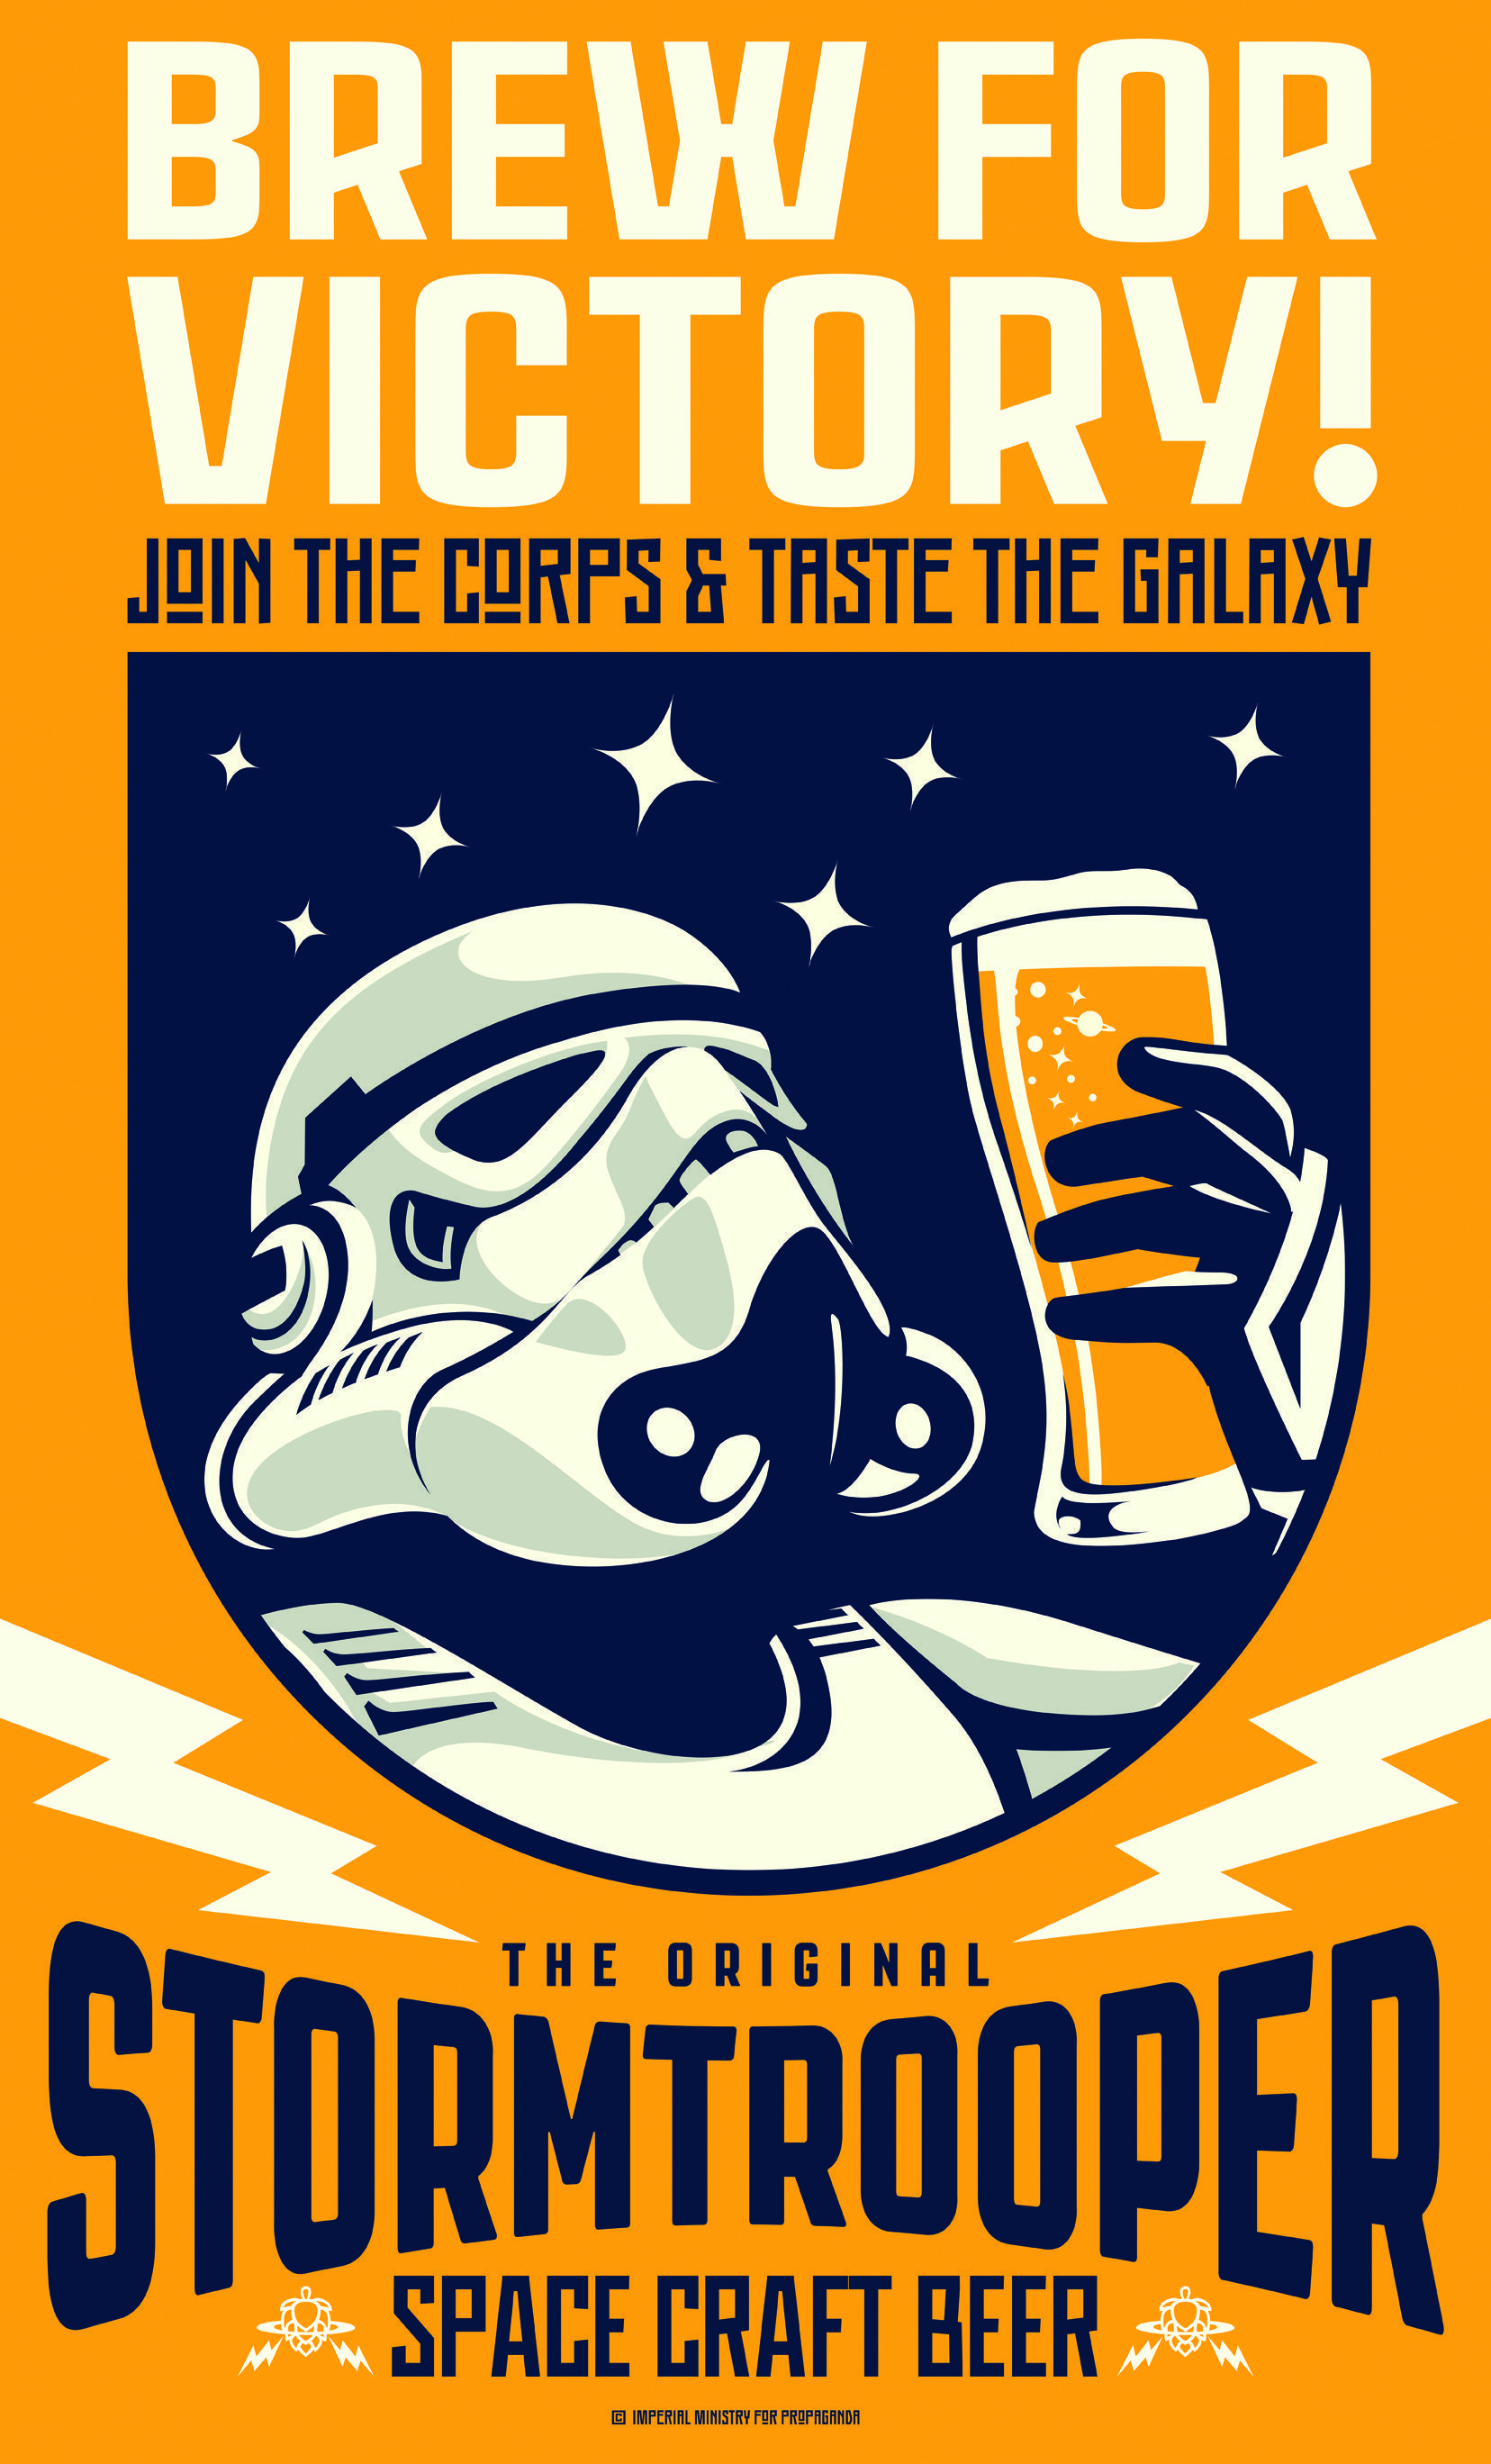 BREW FOR VICTORY! Design for 'Original Stormtrooper Beer' propaganda poster to buy very soon!. Star wars geek, Star wars poster, Star wars art